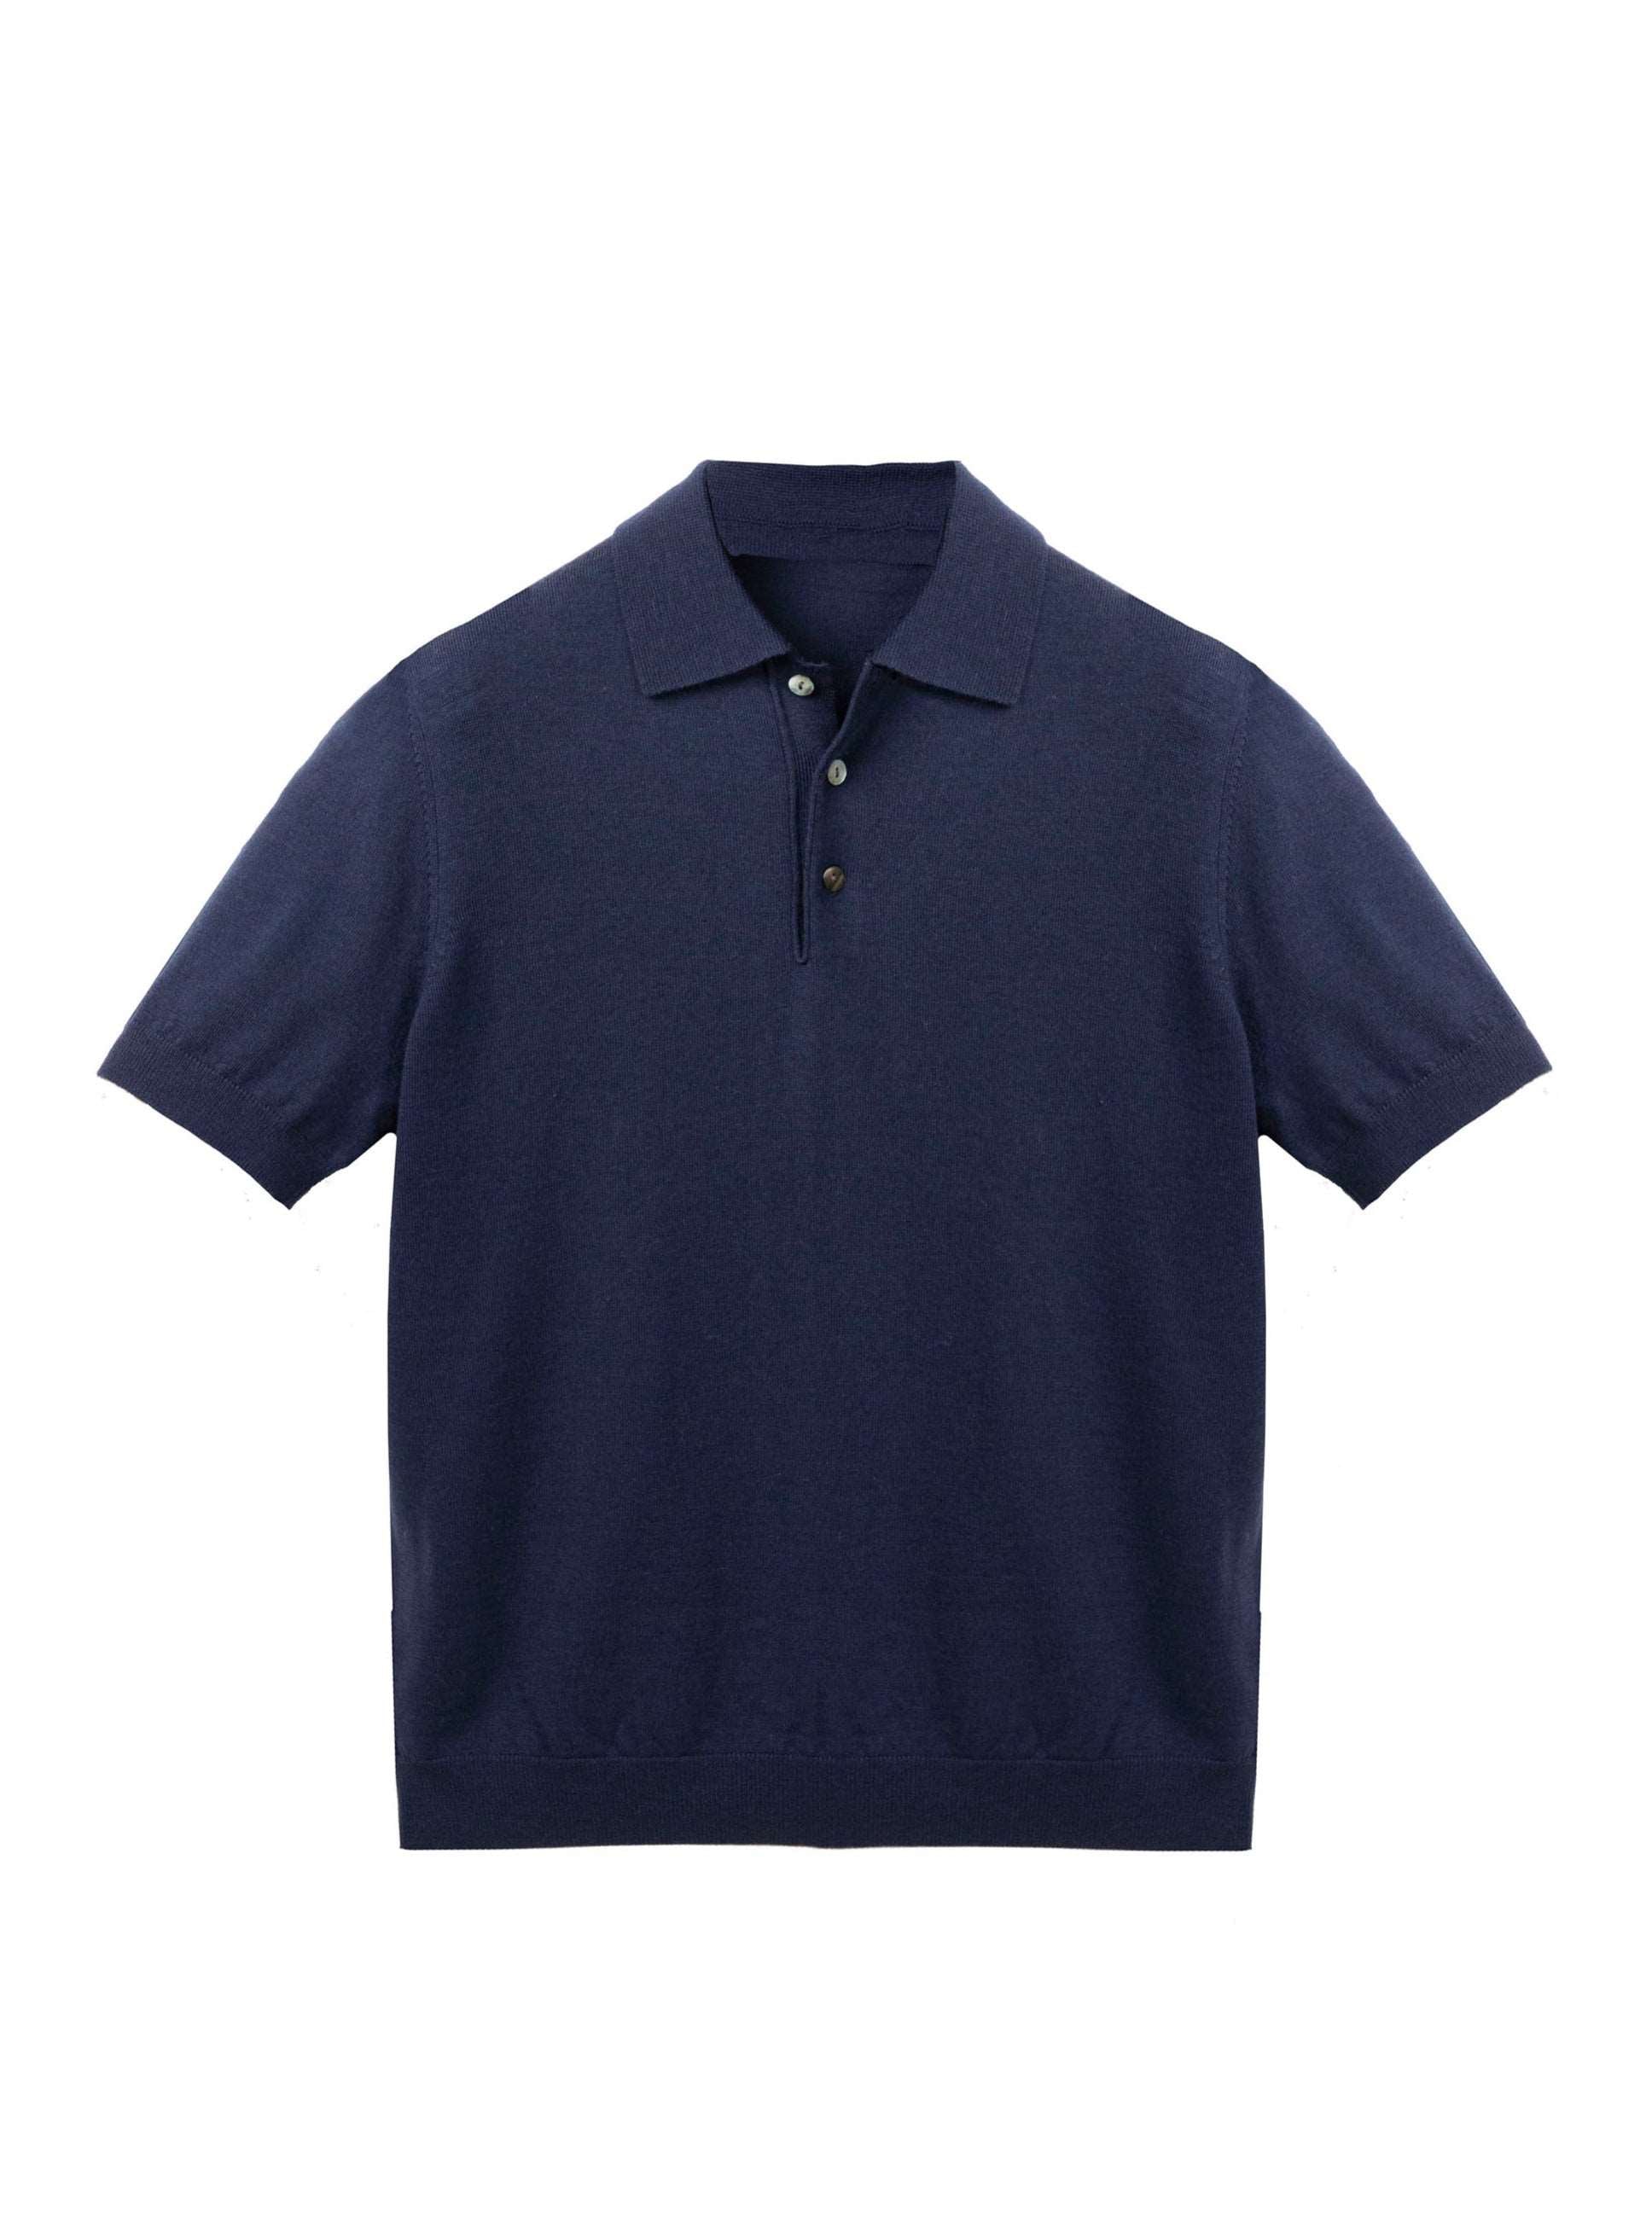 Gent's Merino Polo shirt | Made to Order